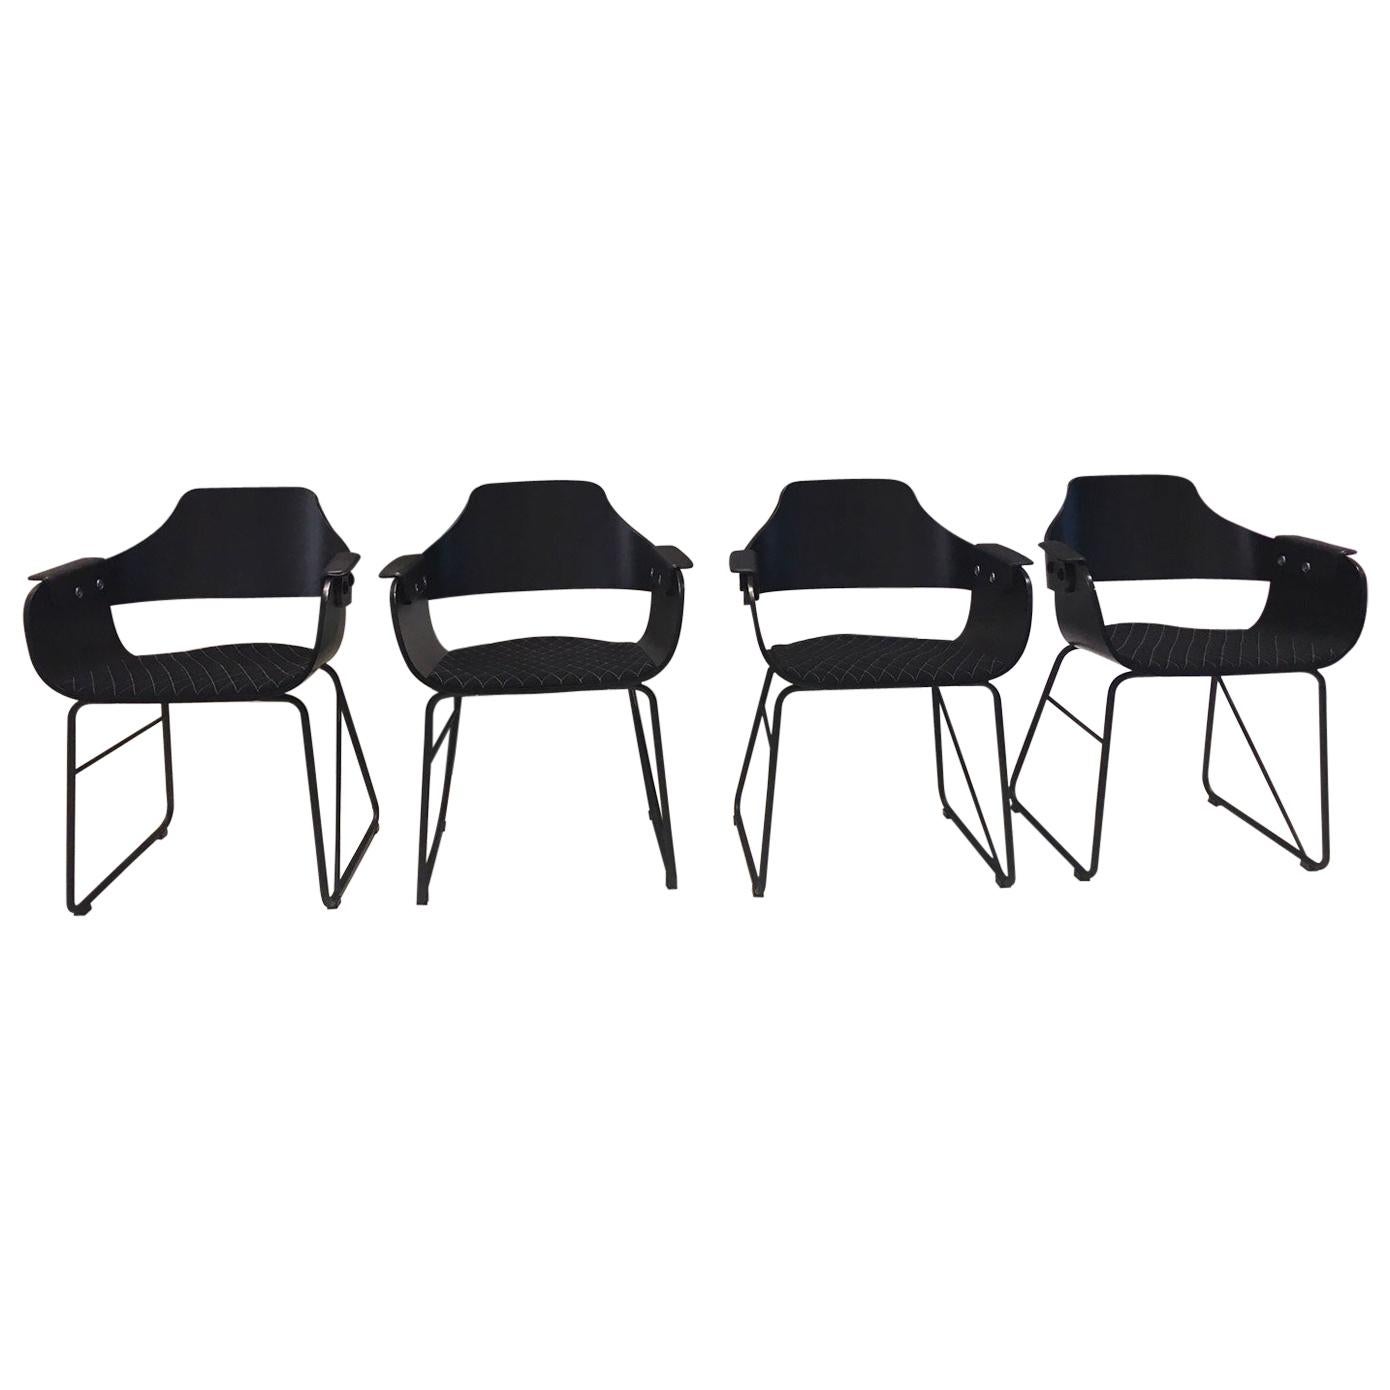 Jaime Hayon, Set of 4 Contemporary Black Armchairs by BD Barcelona